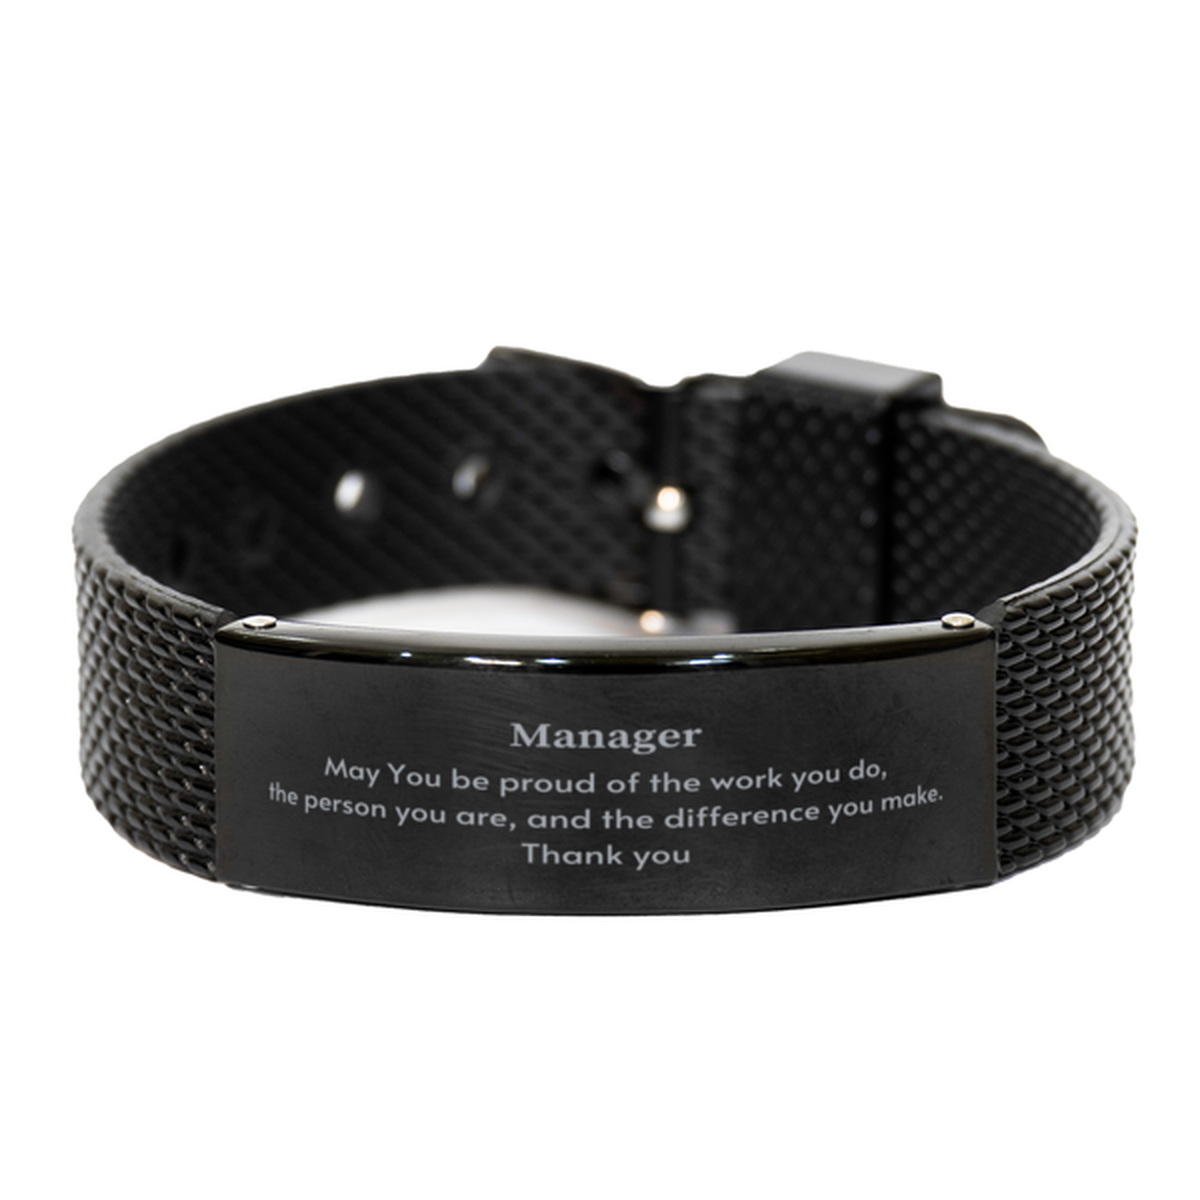 Heartwarming Black Shark Mesh Bracelet Retirement Coworkers Gifts for Manager, Manager May You be proud of the work you do, the person you are Gifts for Boss Men Women Friends